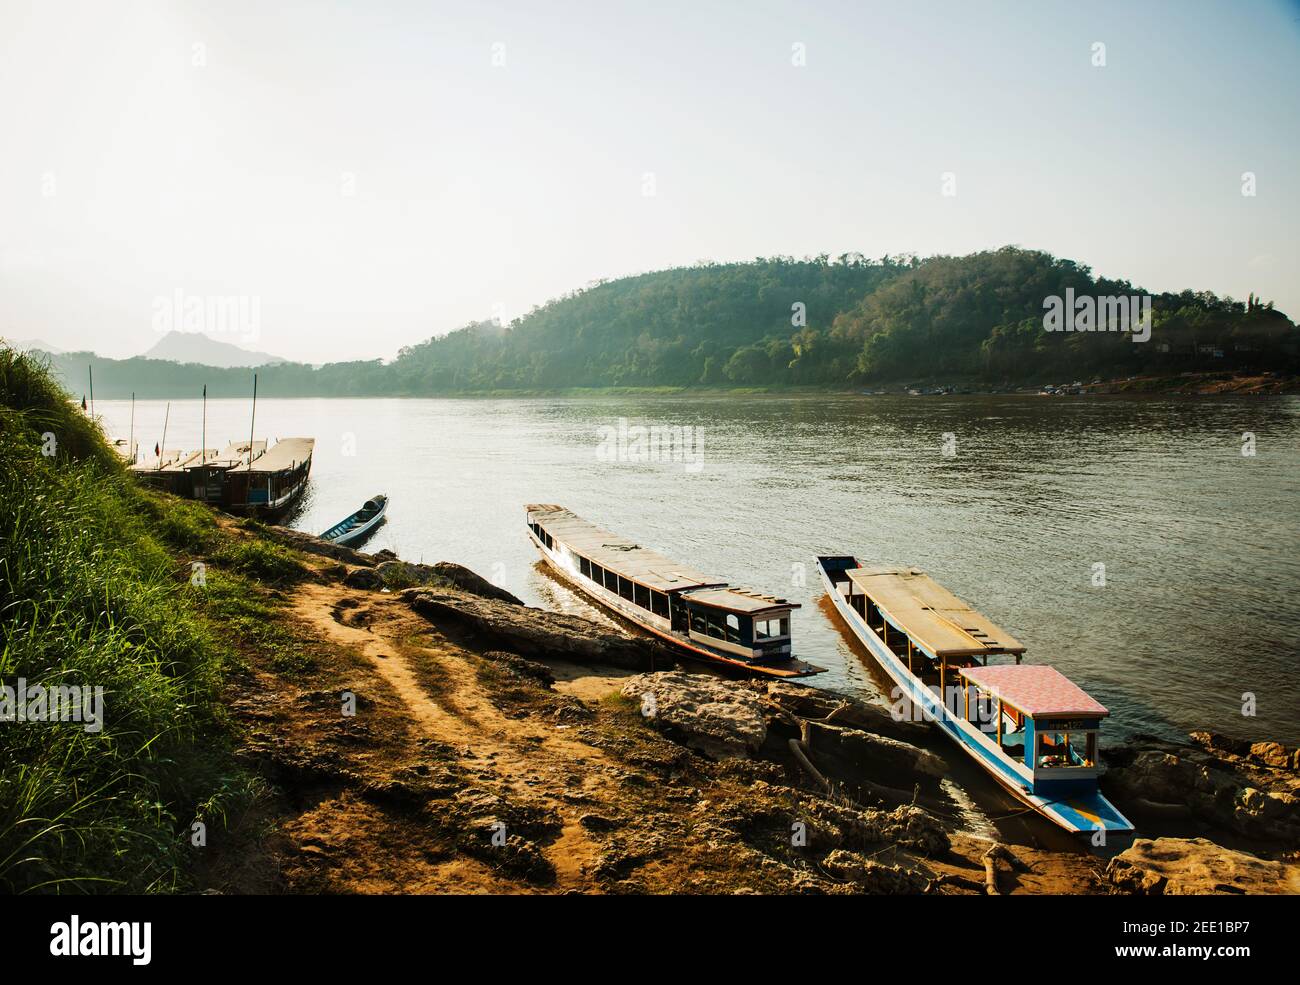 Slow boat docked near Luang Prabang in the Mekong River, Laos, Southeast Asia Stock Photo